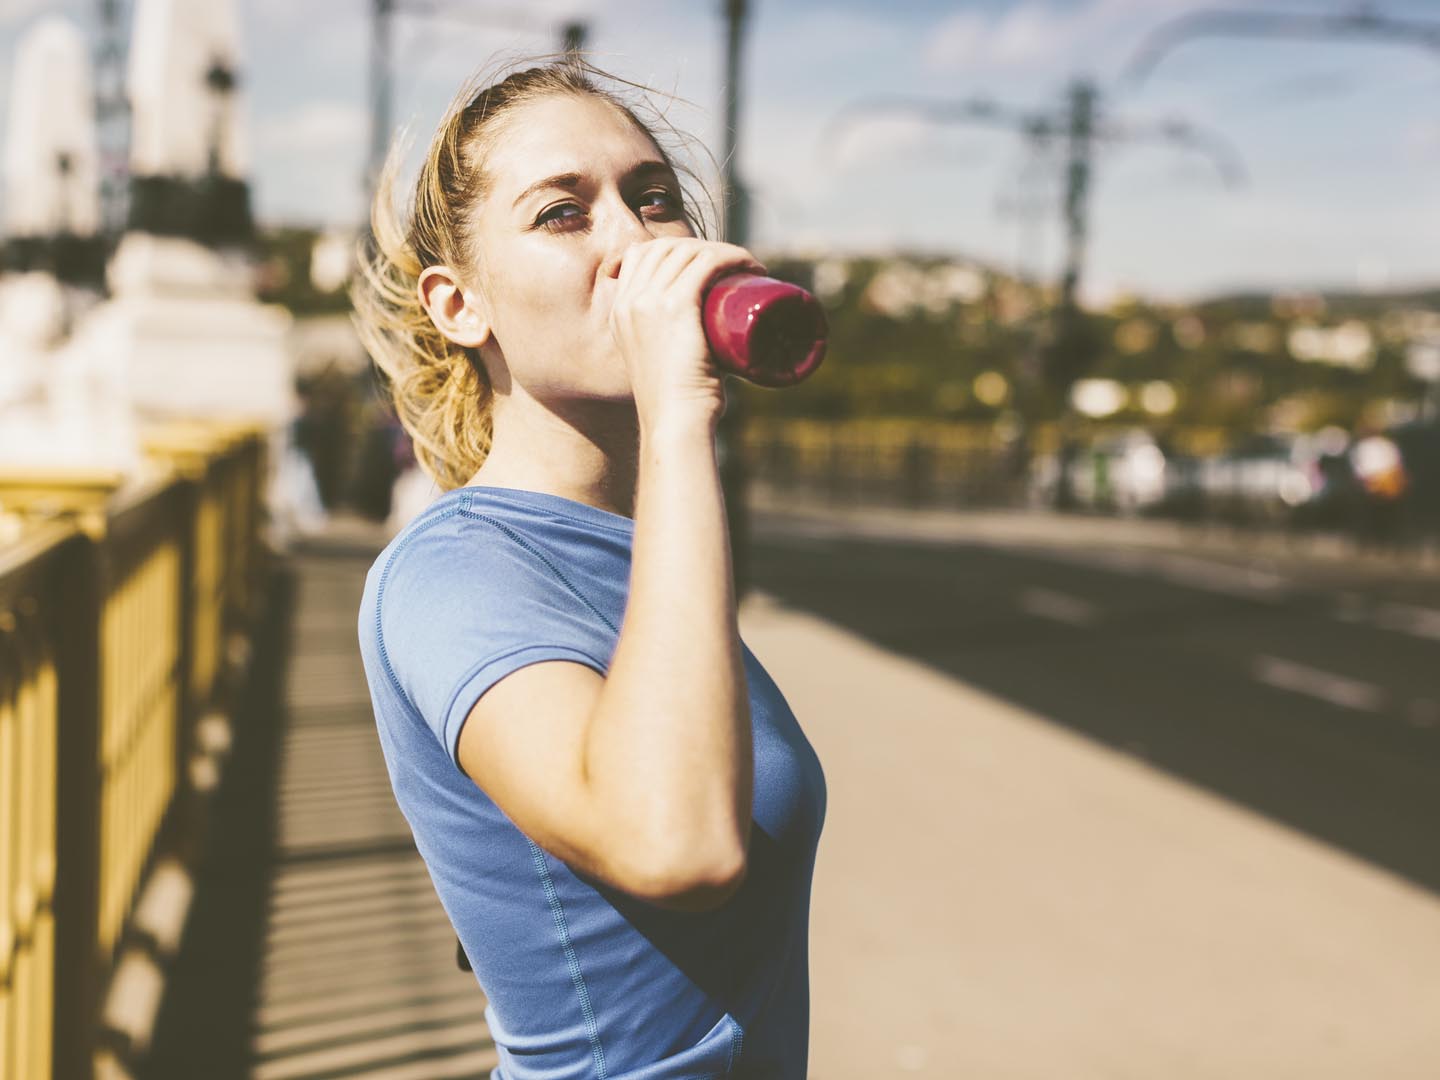 Staying hydrated after exercising